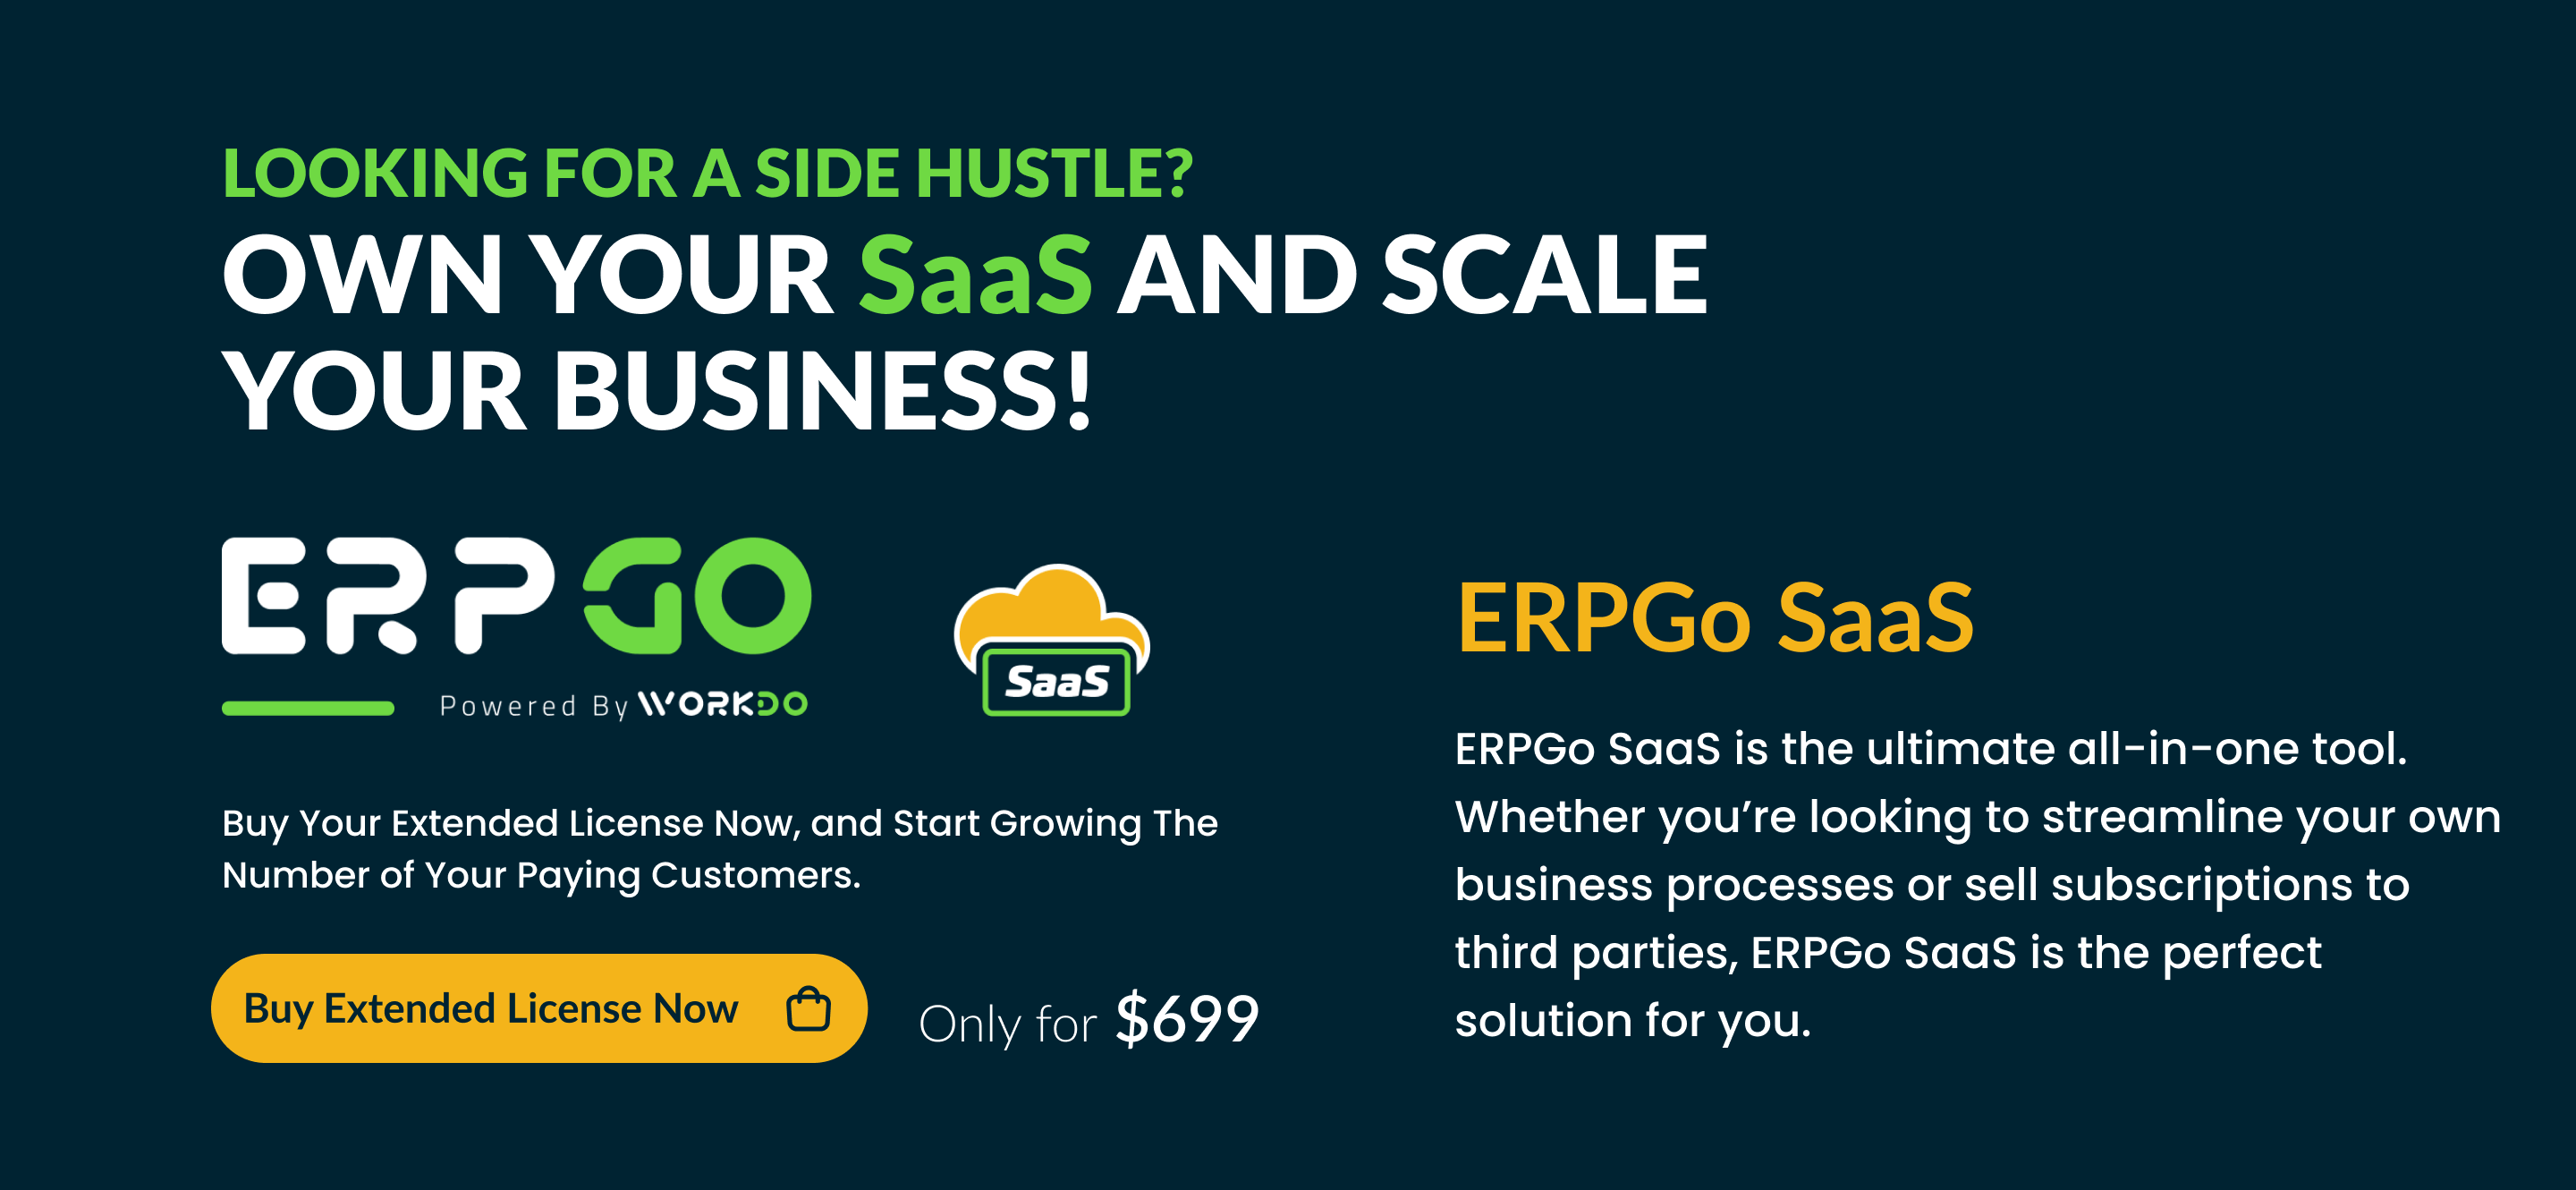 ERPGo SaaS - All In One Business ERP With Project, Account, HRM, CRM & POS - 10